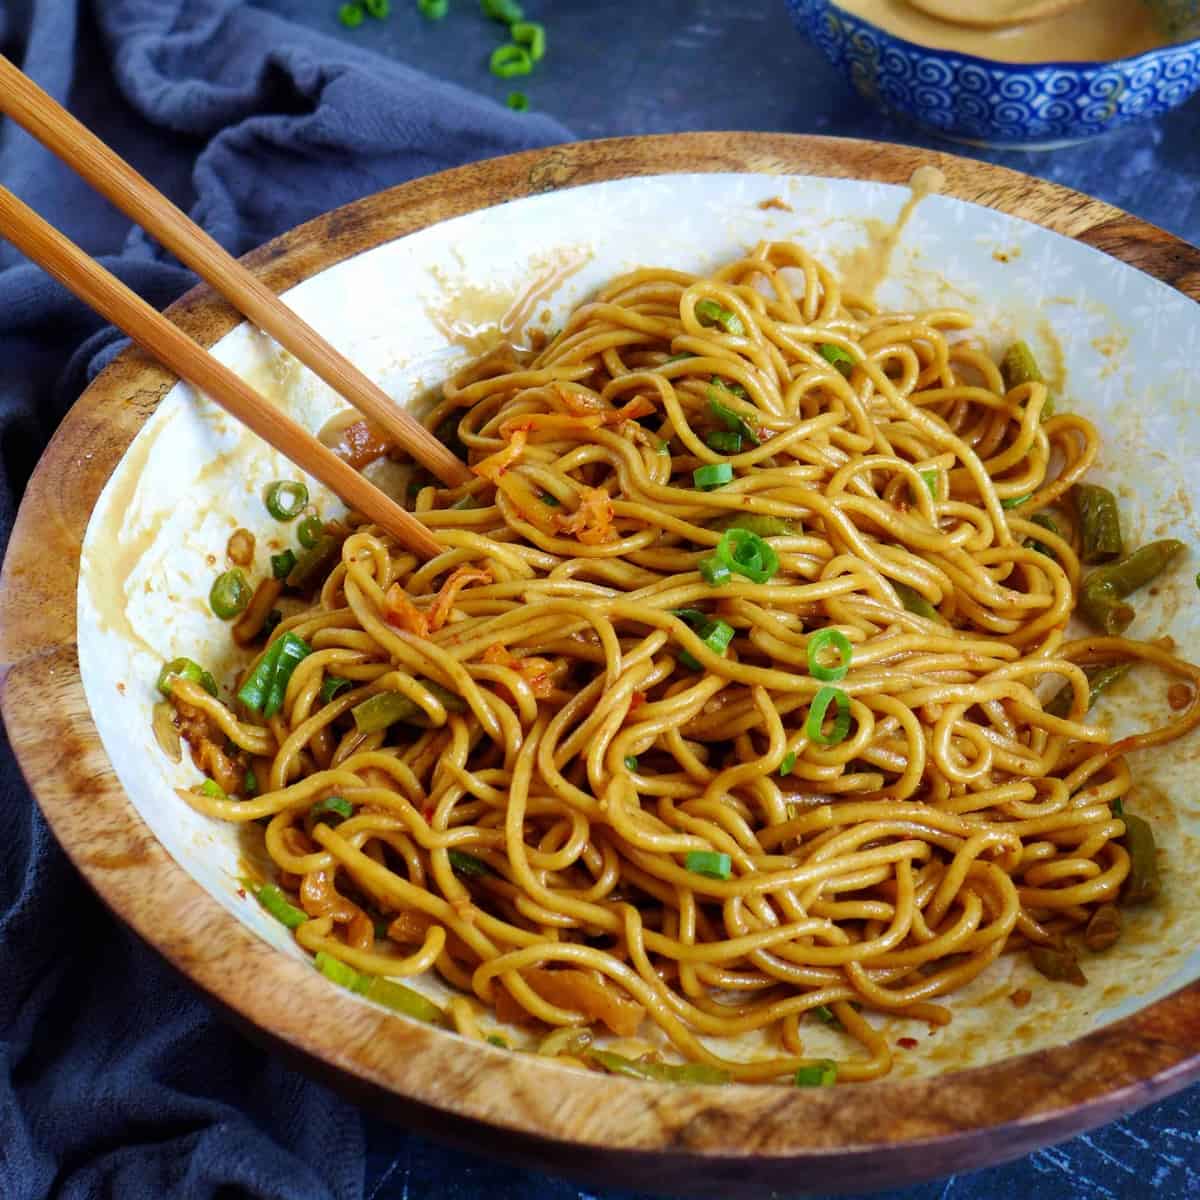 https://redhousespice.com/wp-content/uploads/2021/07/Wuhan-hot-dry-noodles-scaled.jpg